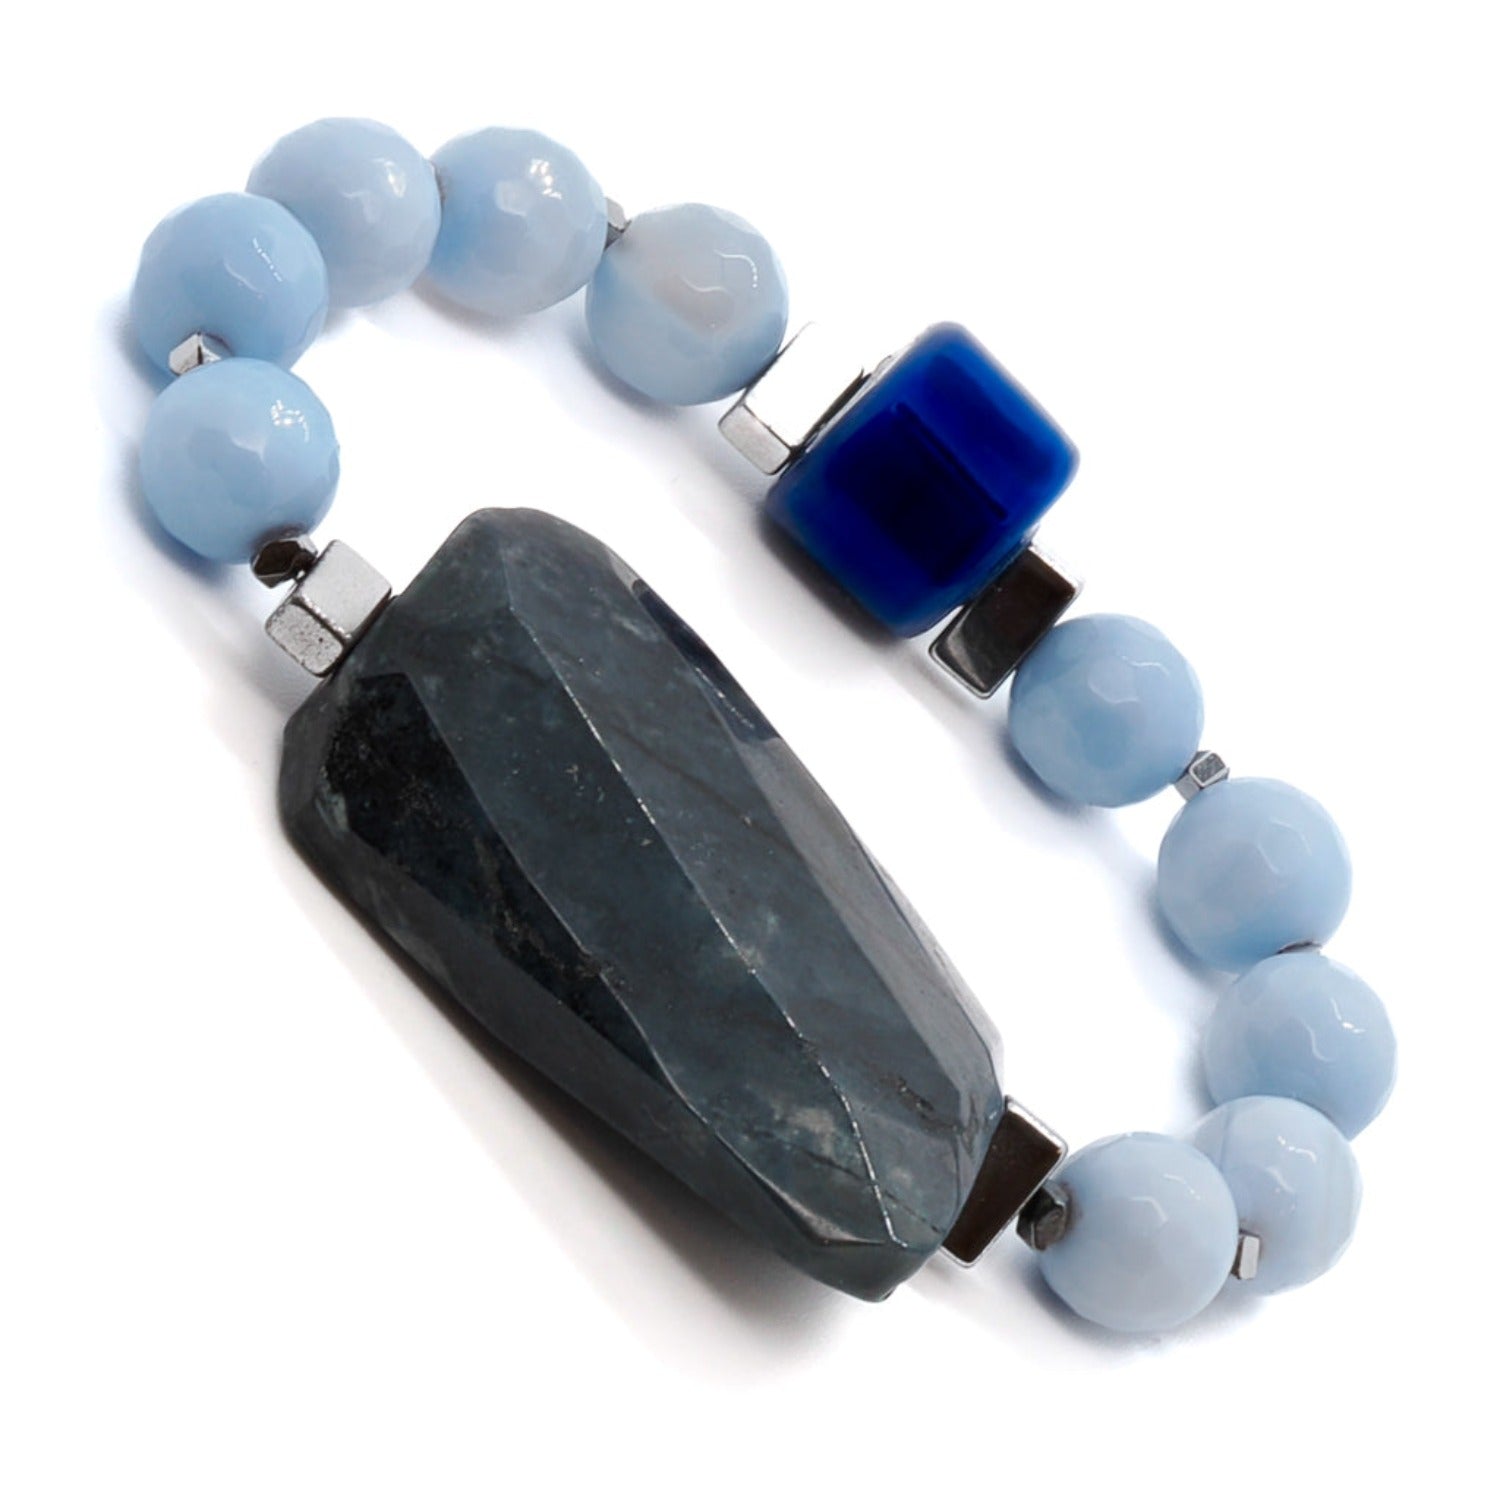 Unique Handcrafted Bracelet with Blue Lace Agate and Jasper Stones